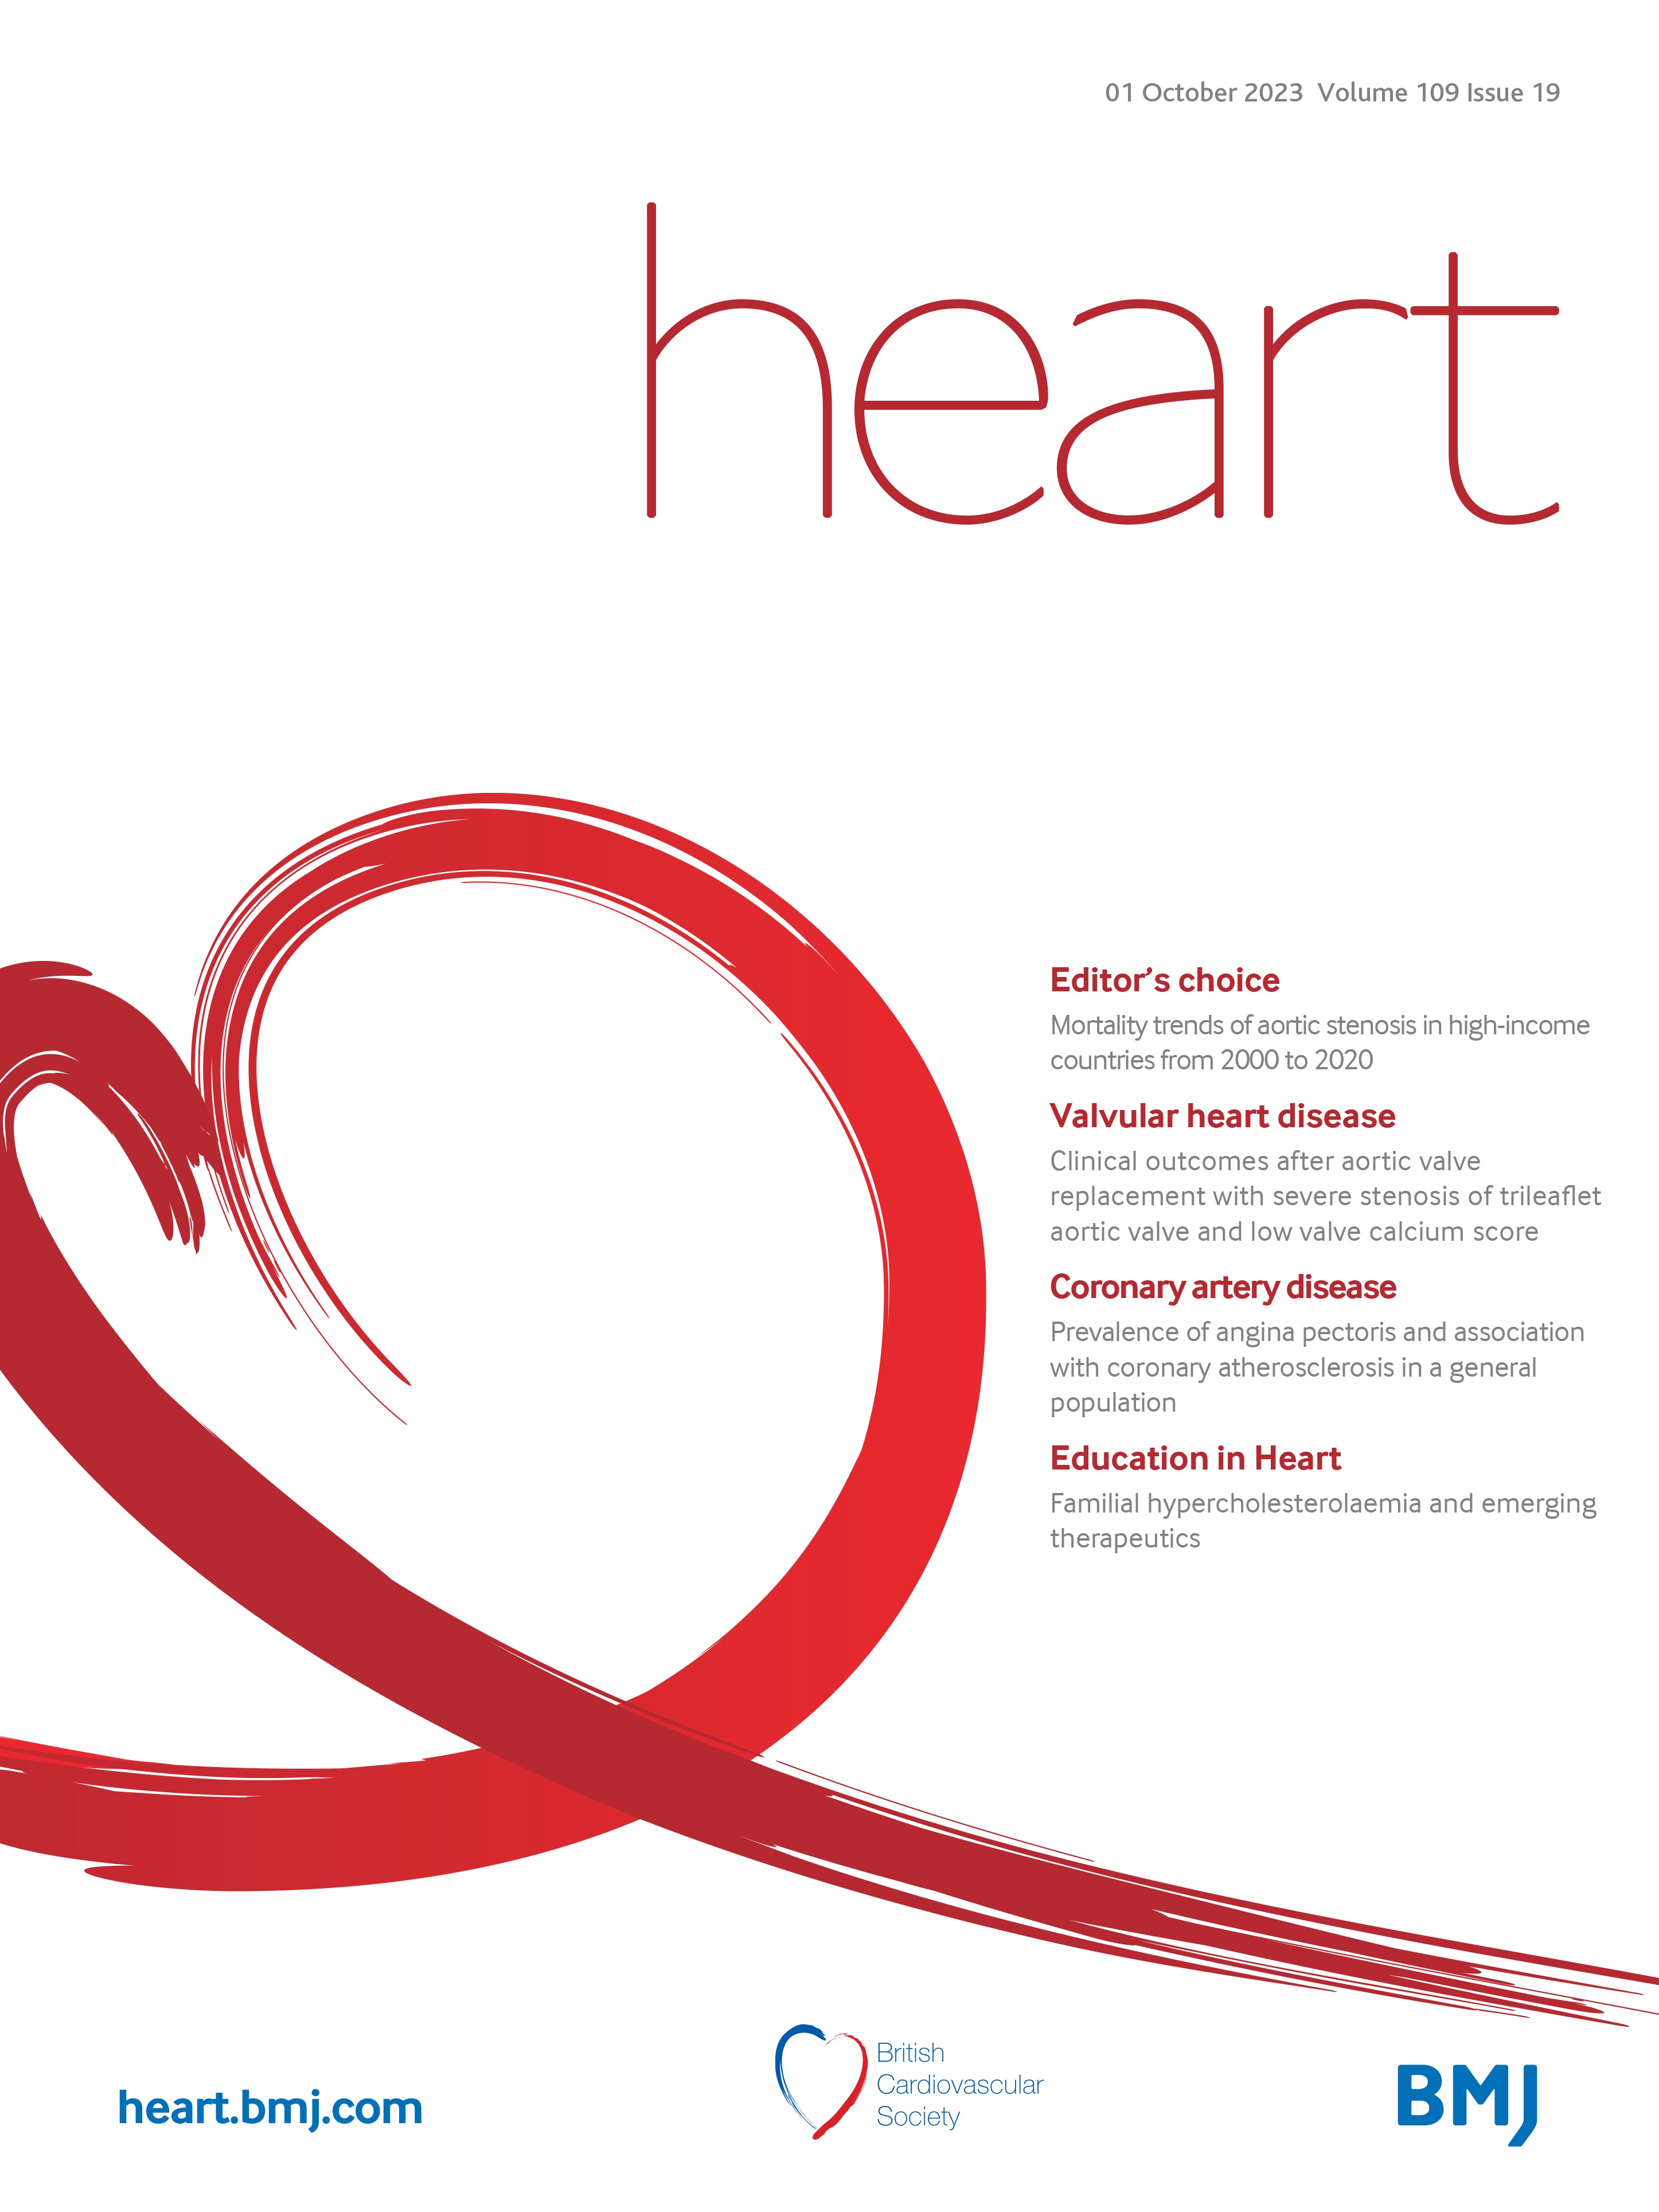 Heartbeat: a trend over the past 20 years towards decreased aortic stenosis mortality in patients aged 80 years or older